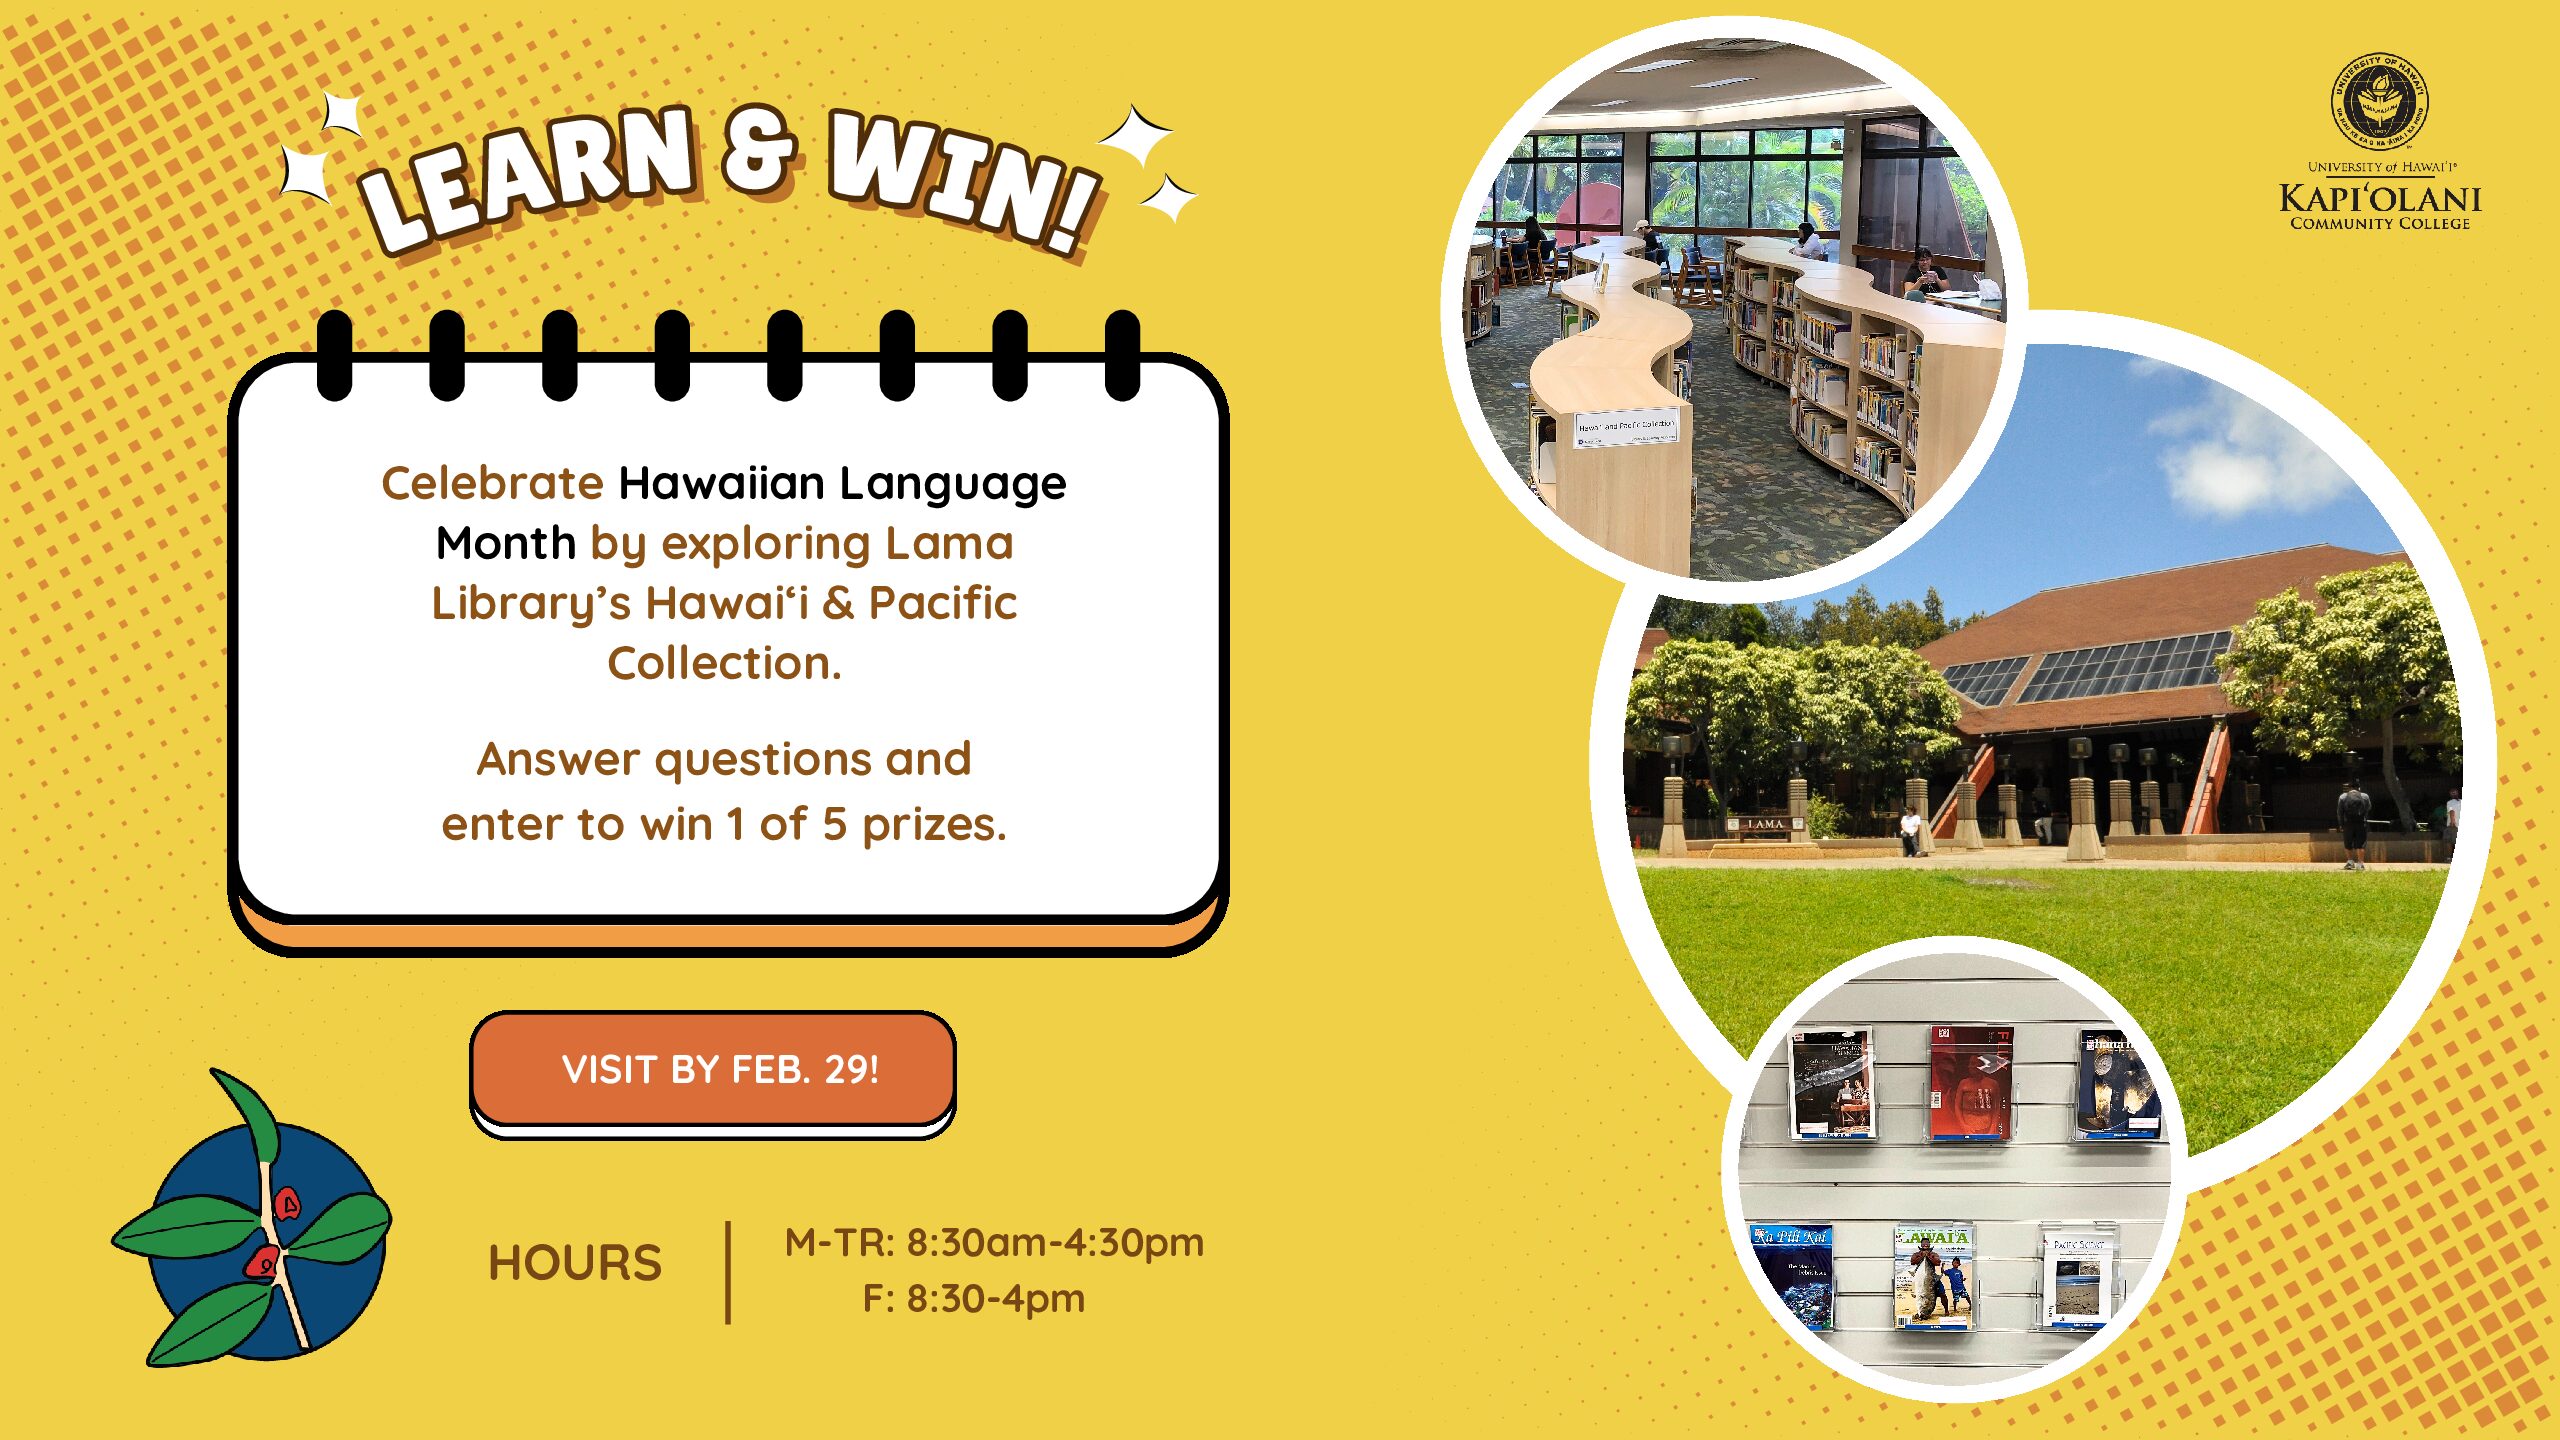 Celebrate Hawaiian Language Month @ Lama Library Hawaiʻi & Pacific Collection. Enter to win prizes 🎁